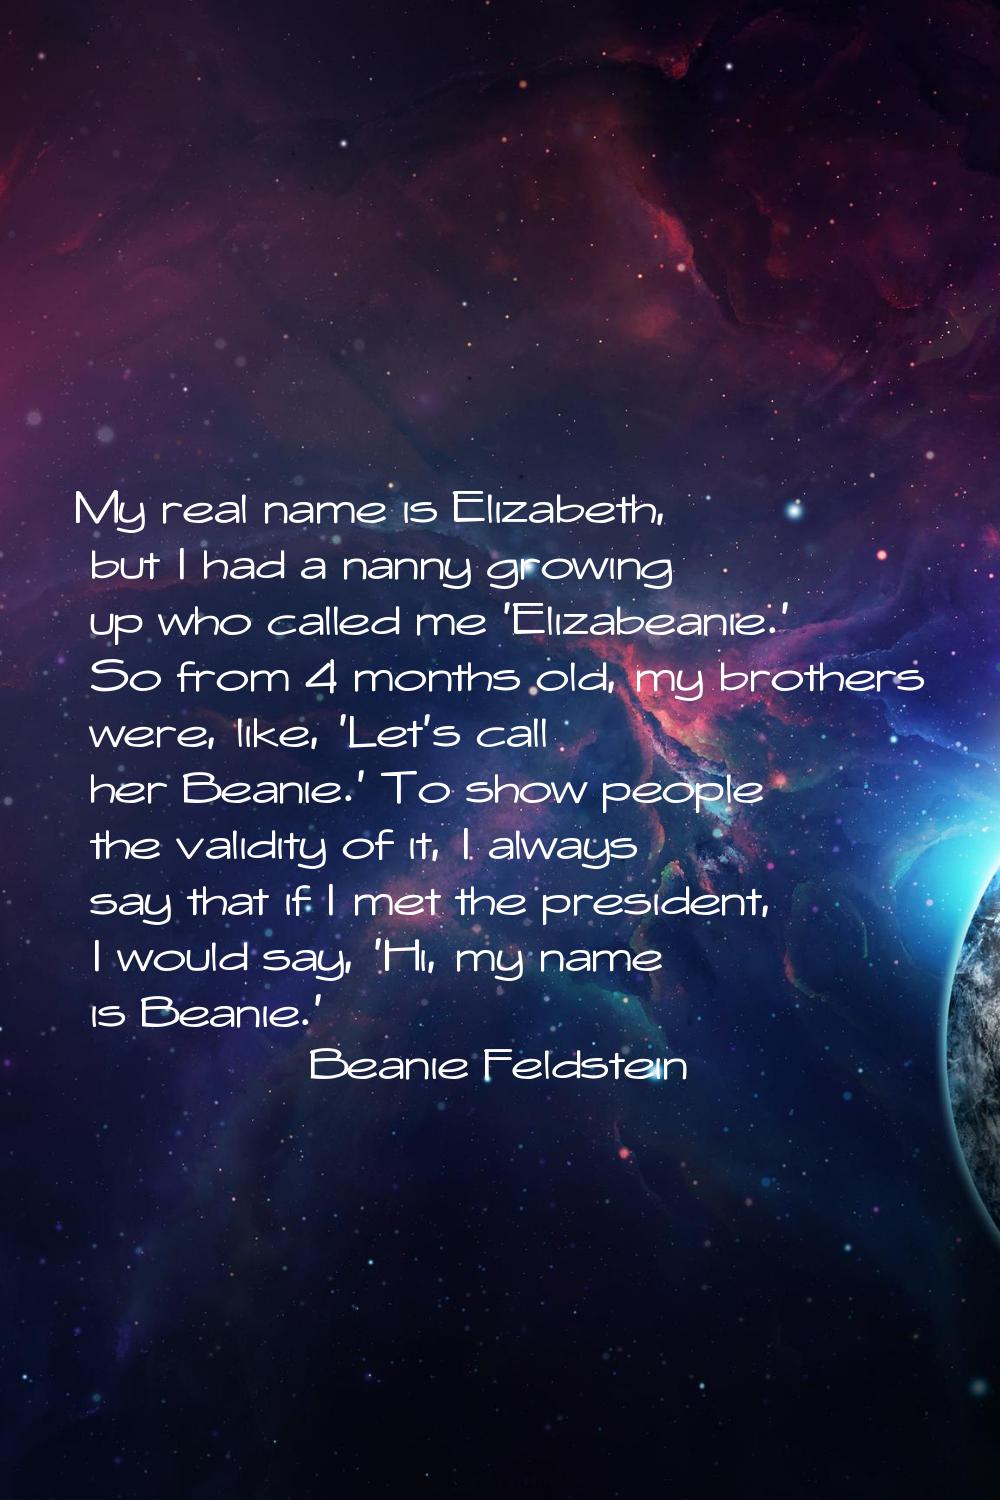 My real name is Elizabeth, but I had a nanny growing up who called me 'Elizabeanie.' So from 4 mont